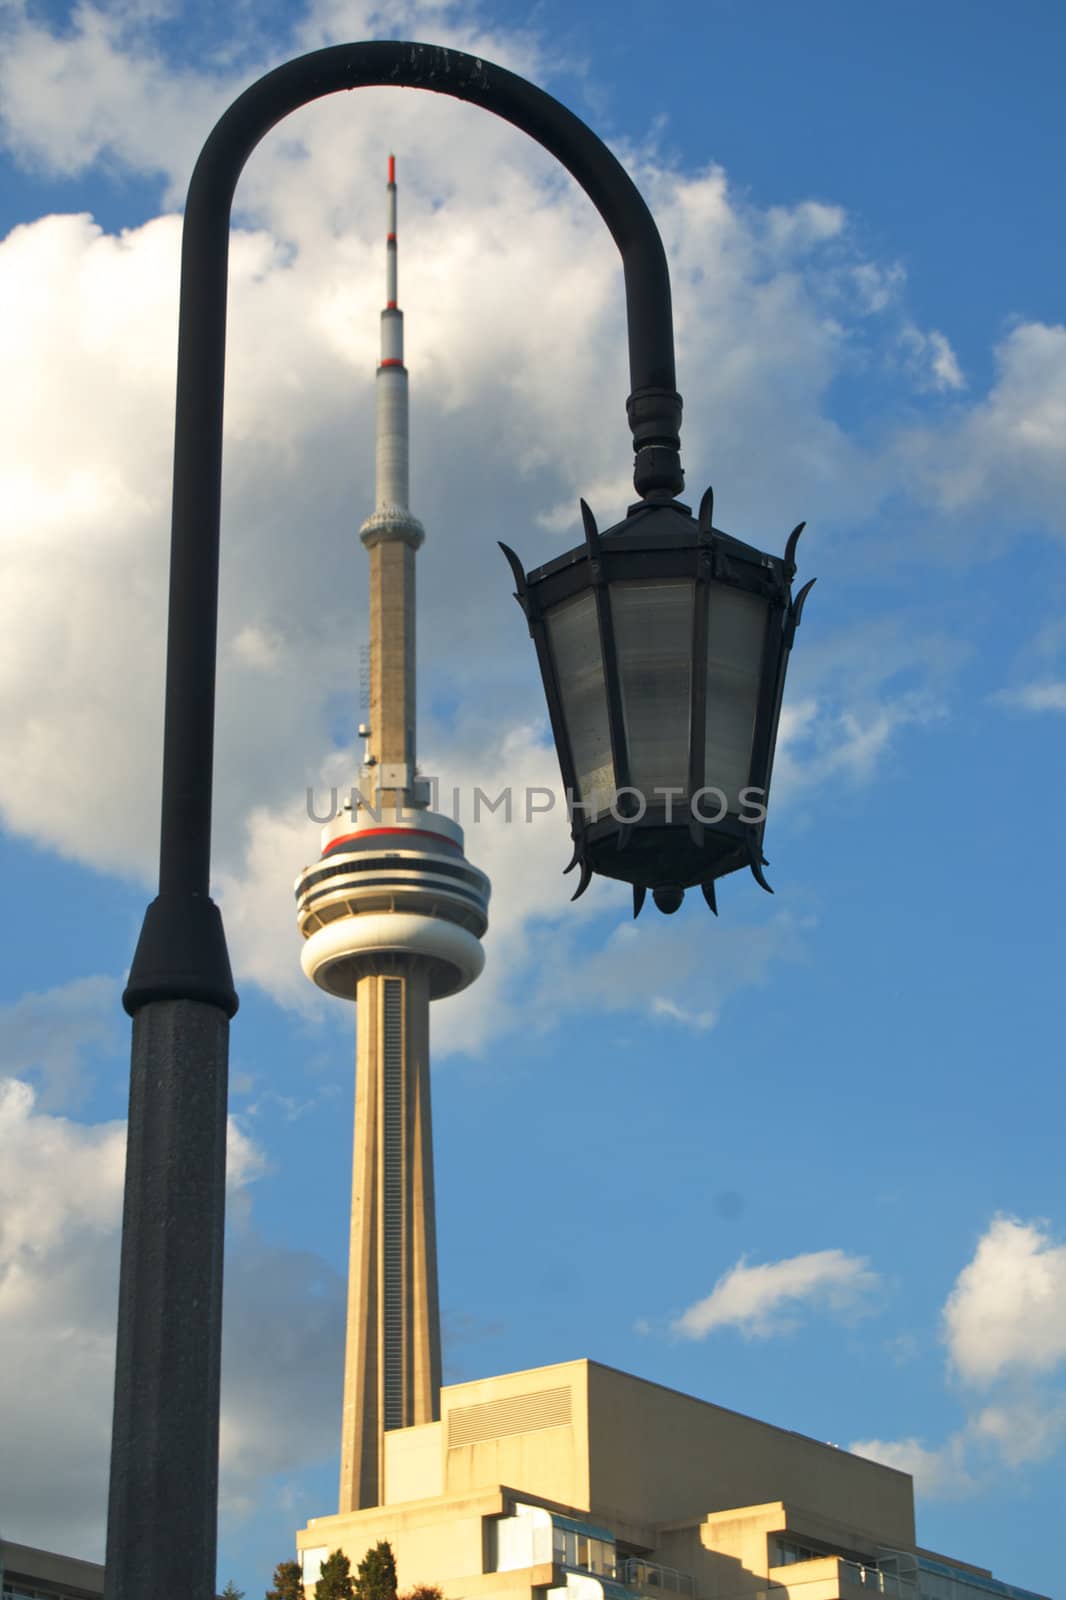 CN Tower and lamppost by tyroneburkemedia@gmail.com